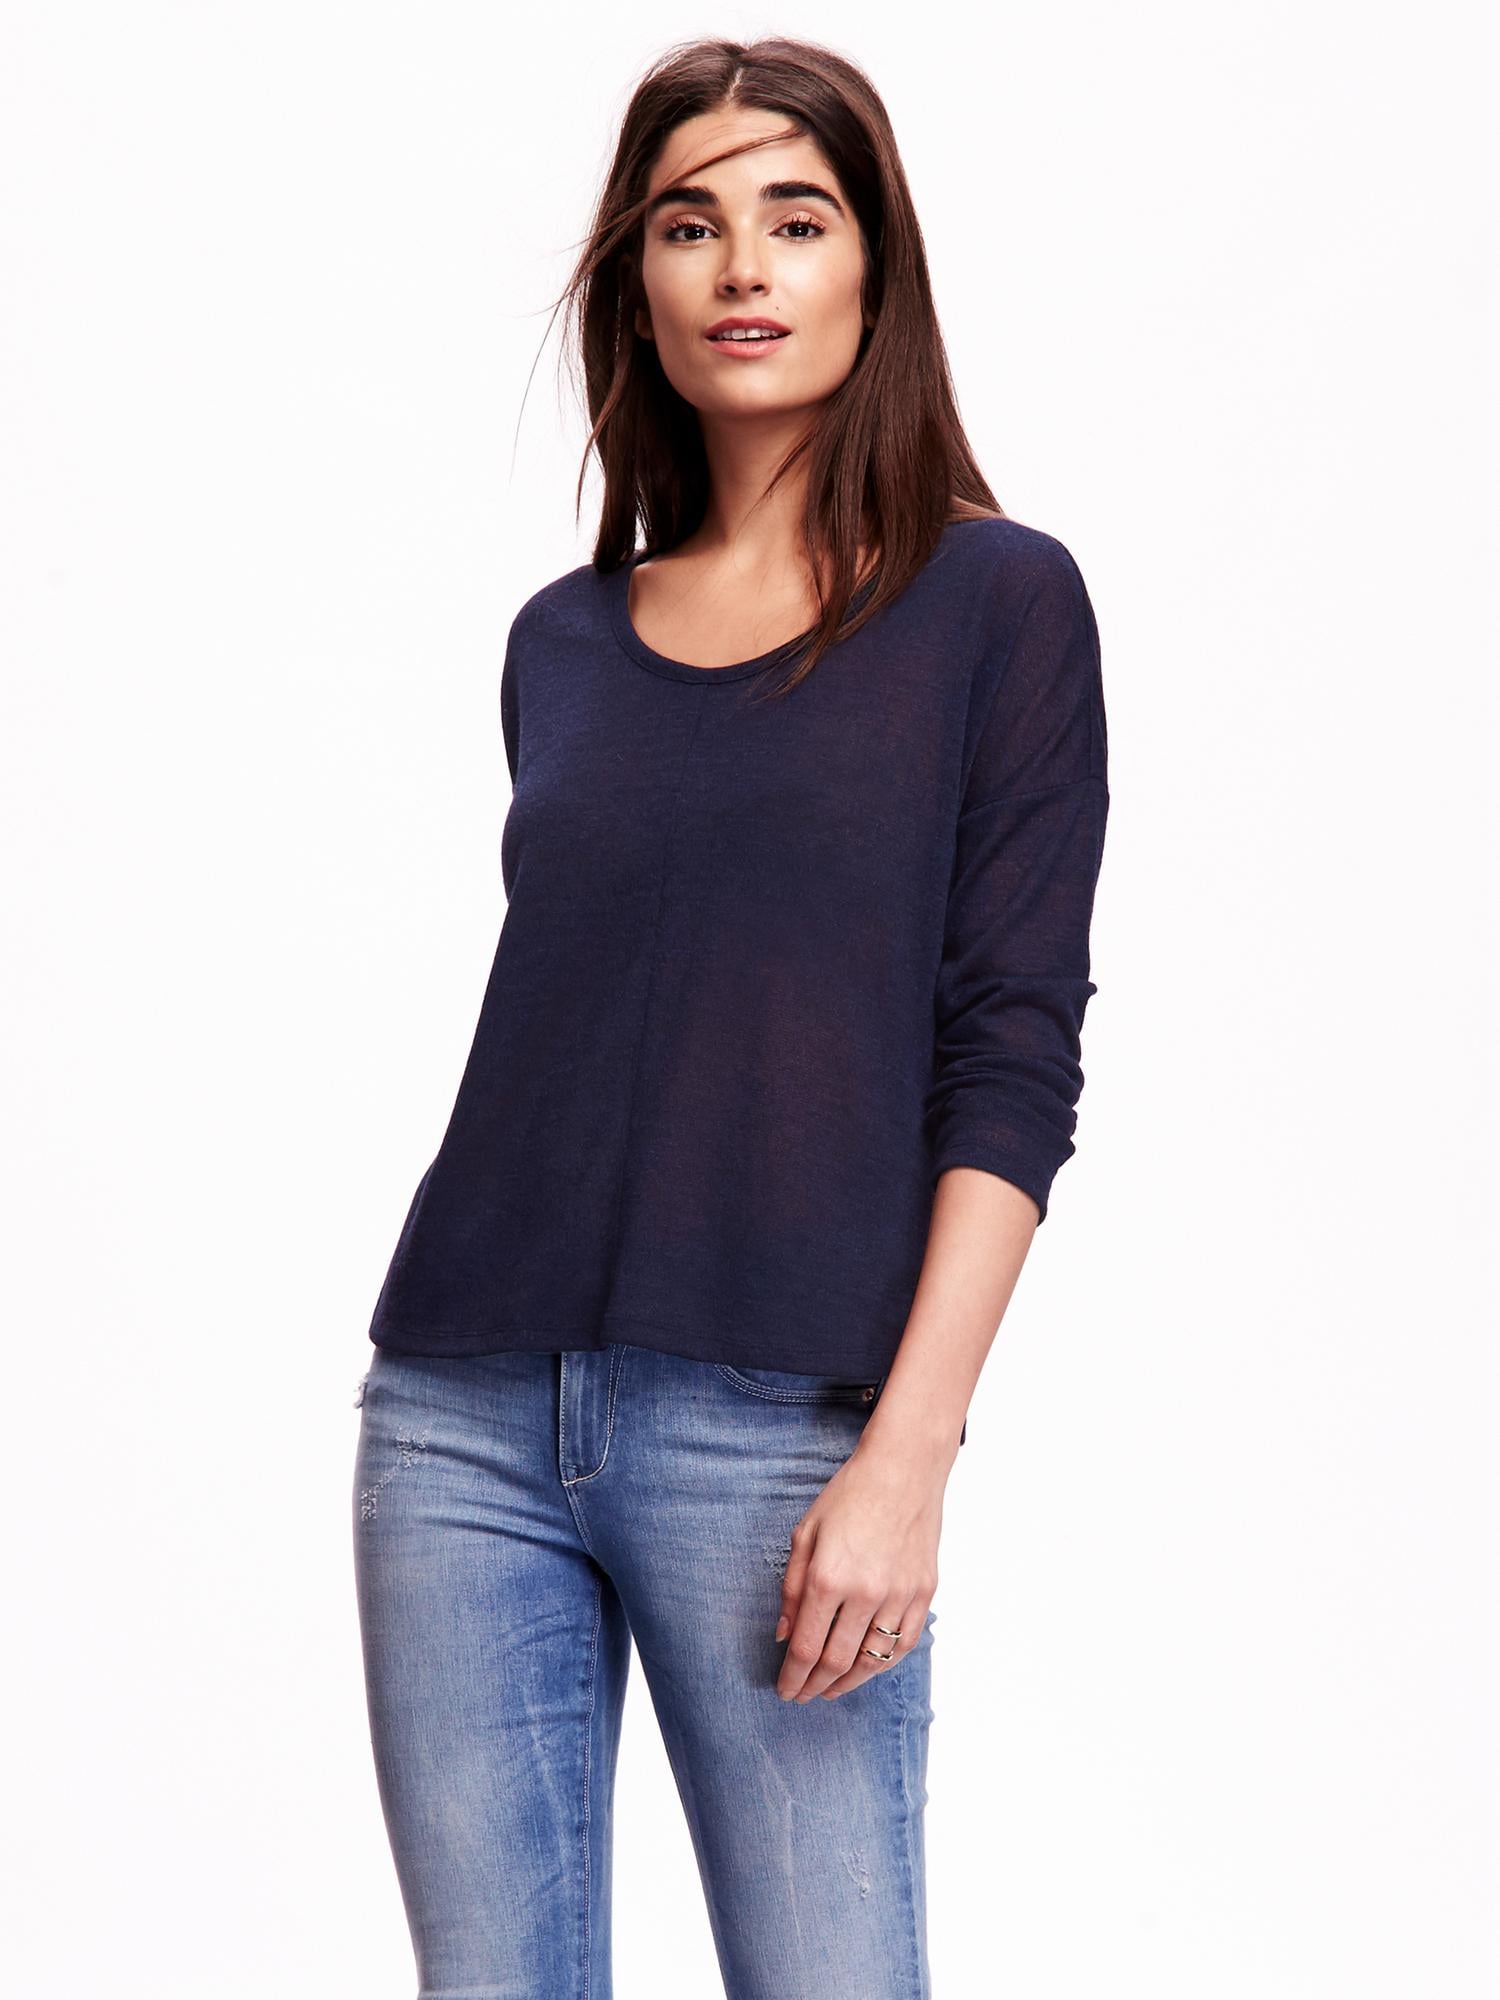 Lightweight Sweater-Knit Top for Women | Old Navy